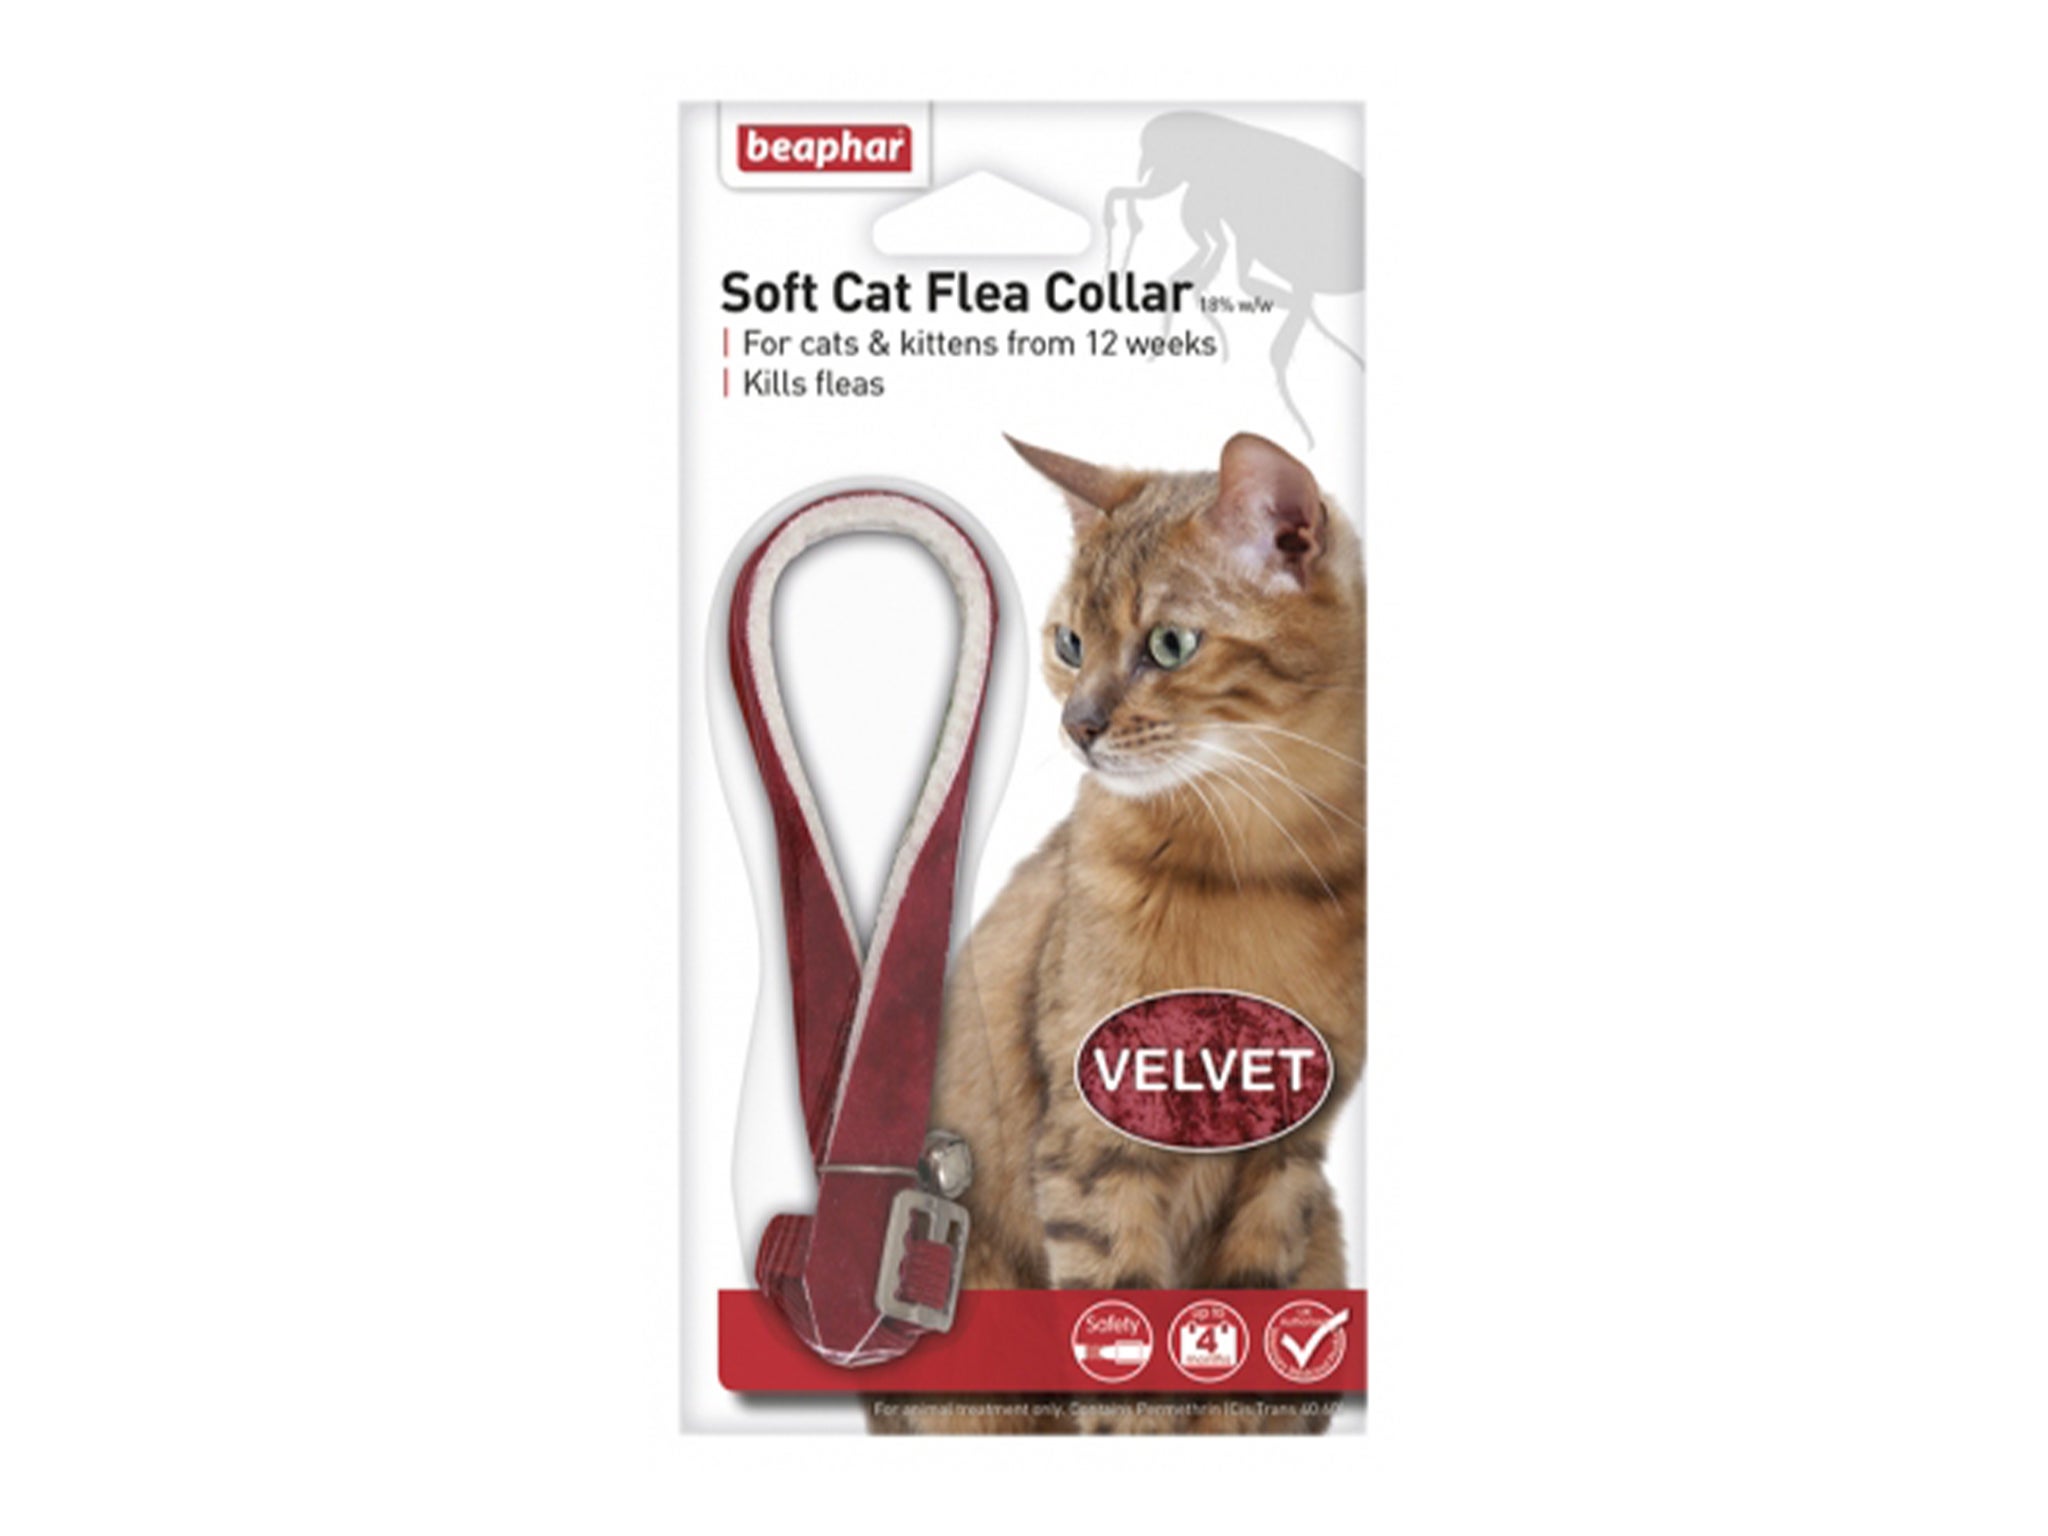 With infanticide built-in, this collar will keep you worrying about the risk of fleas